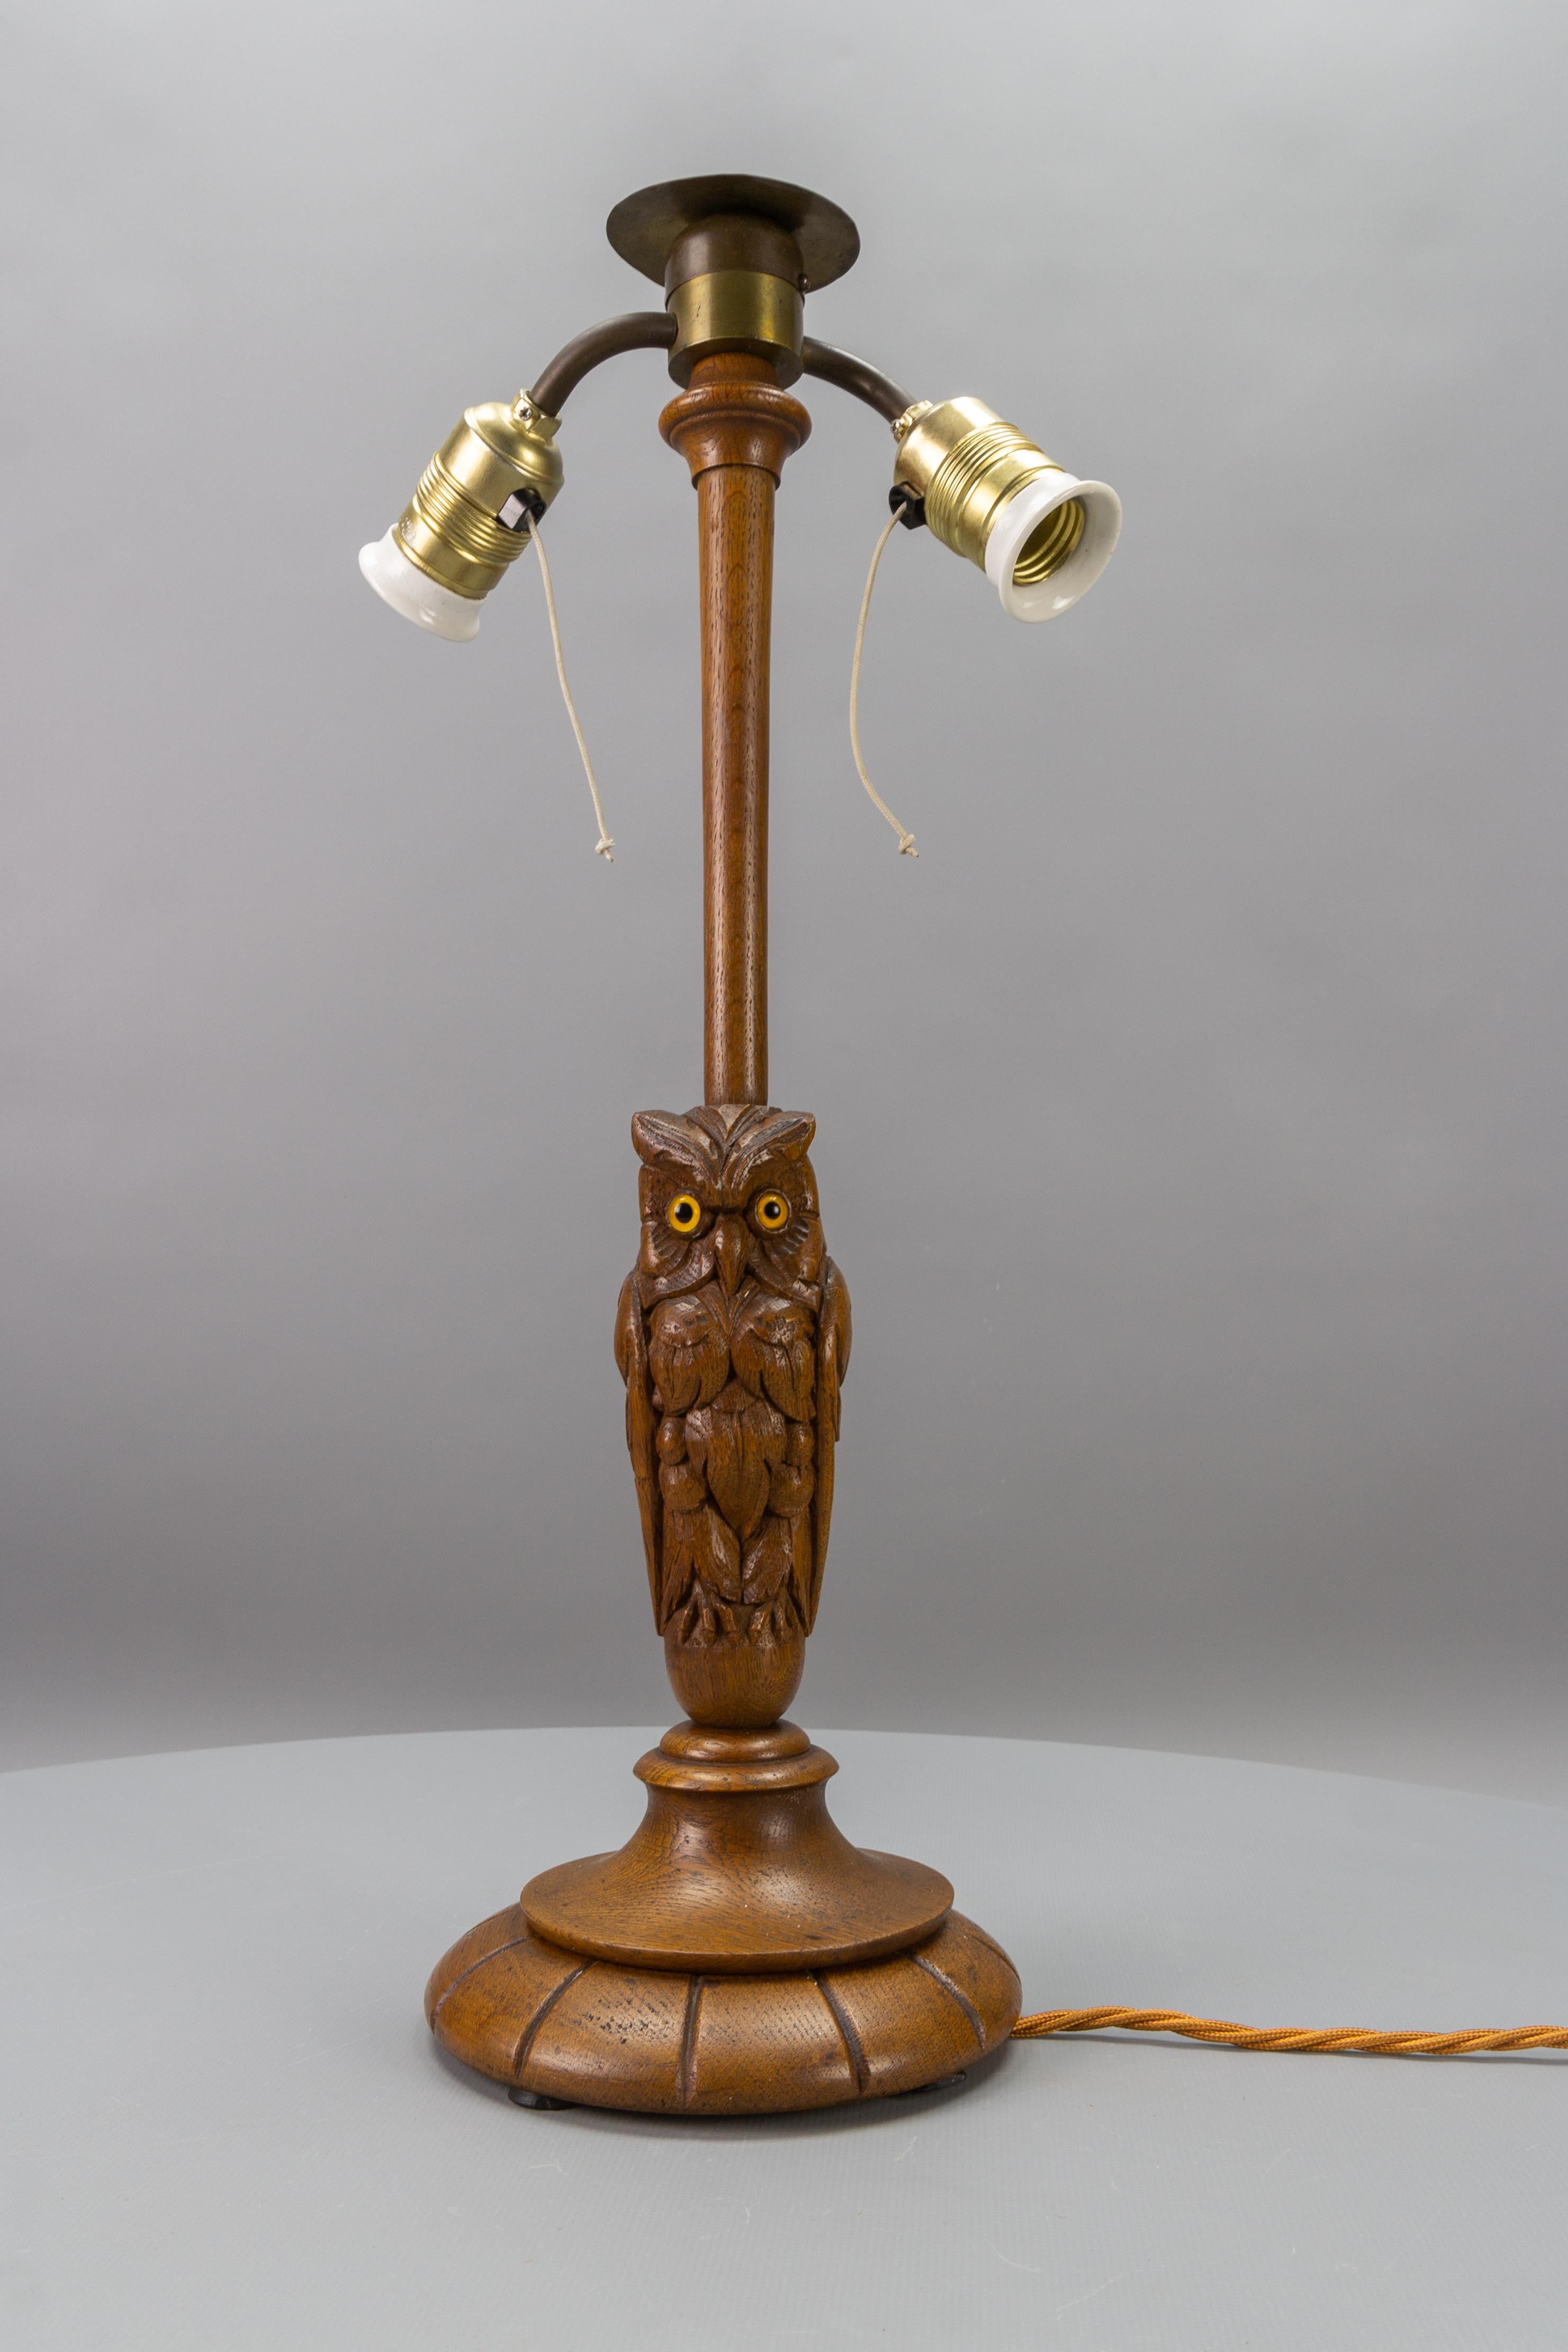 Antique Art Deco Two-Light Owl Sculpture Table or Desk Lamp Germany, ca. 1920
This antique Art Deco period table lamp or desk lamp base is a stunning piece made of hand-carved oakwood in the shape of an owl with glass eyes. 
Two new sockets for E27